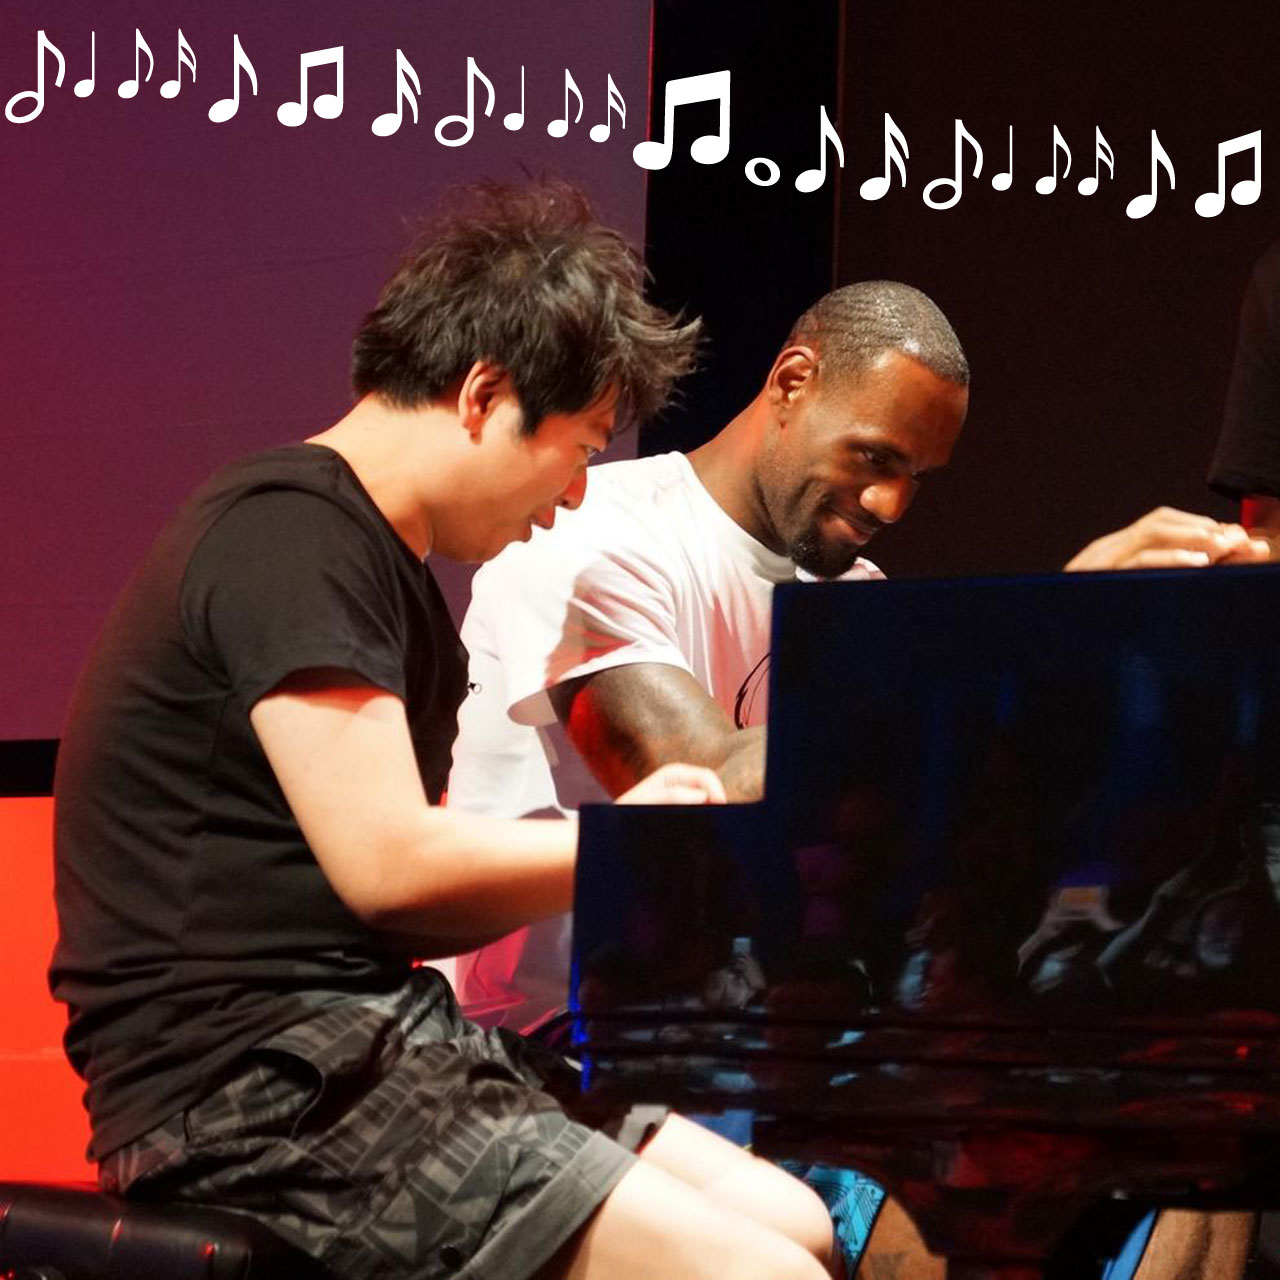 Lang Lang teams with LeBron James for a Slam Dunk on the piano.